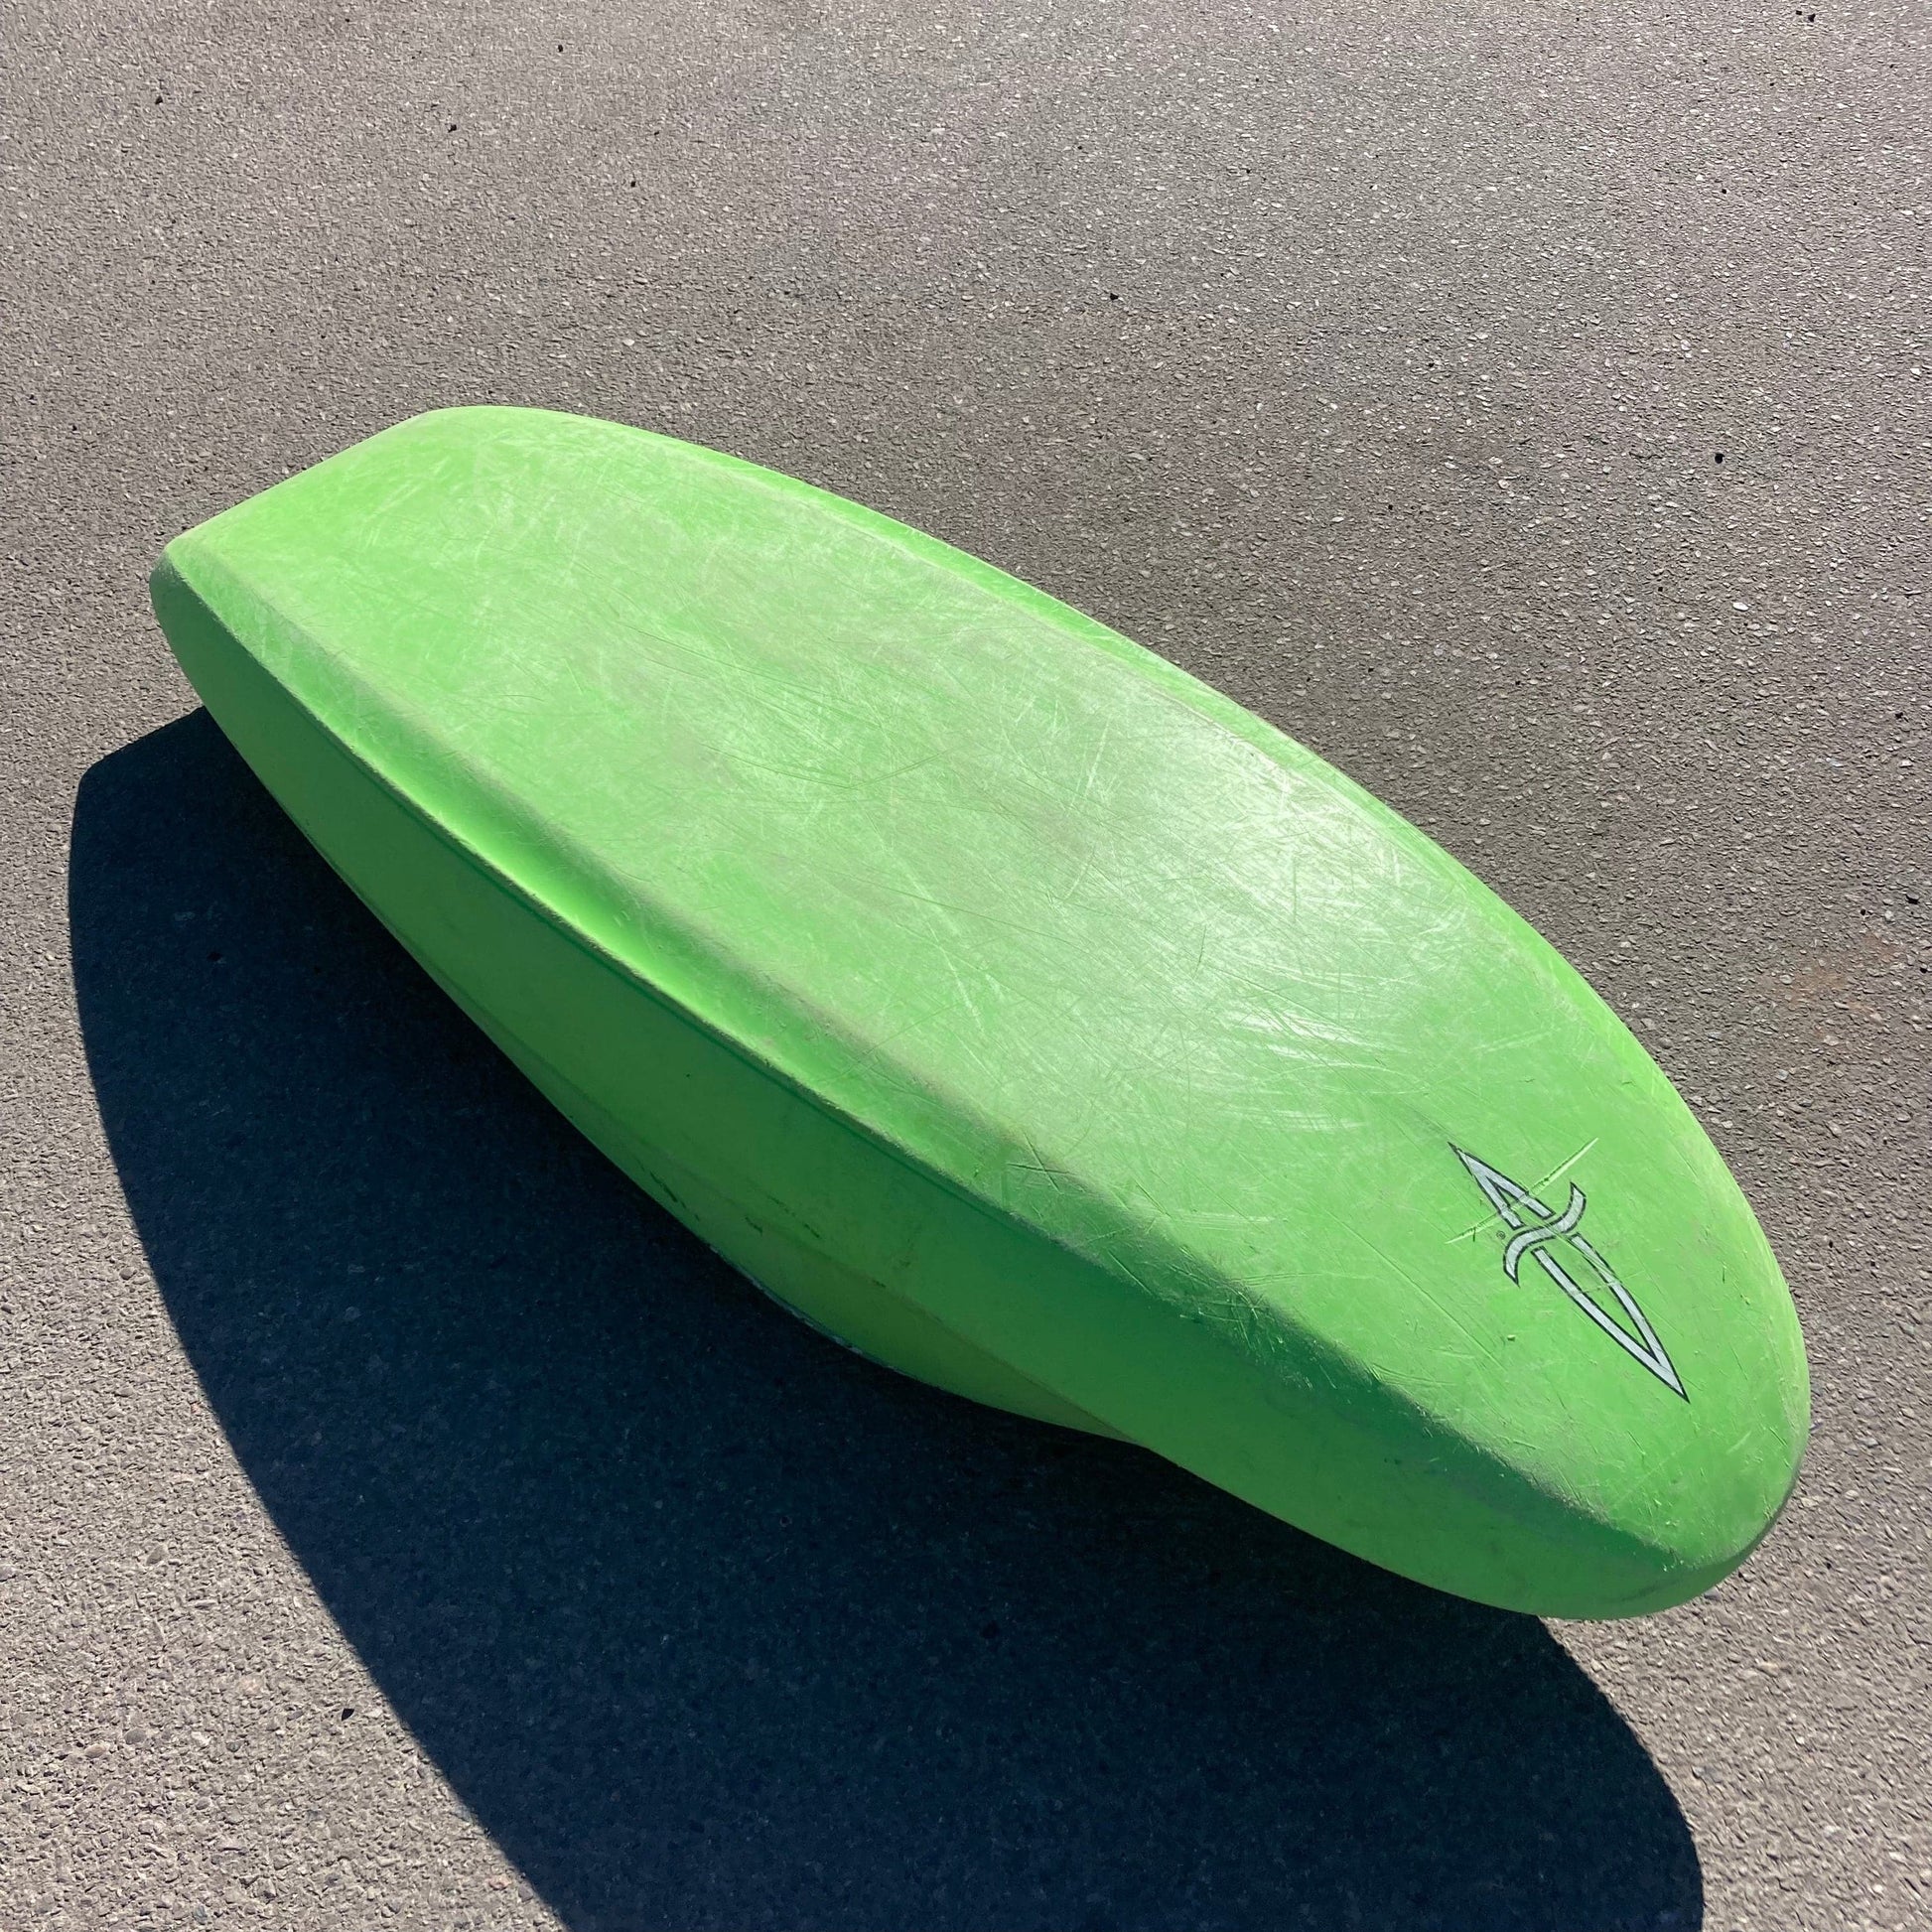 A 4CRS Consignment Jitsu 5.9 surfboard laying on the ground.